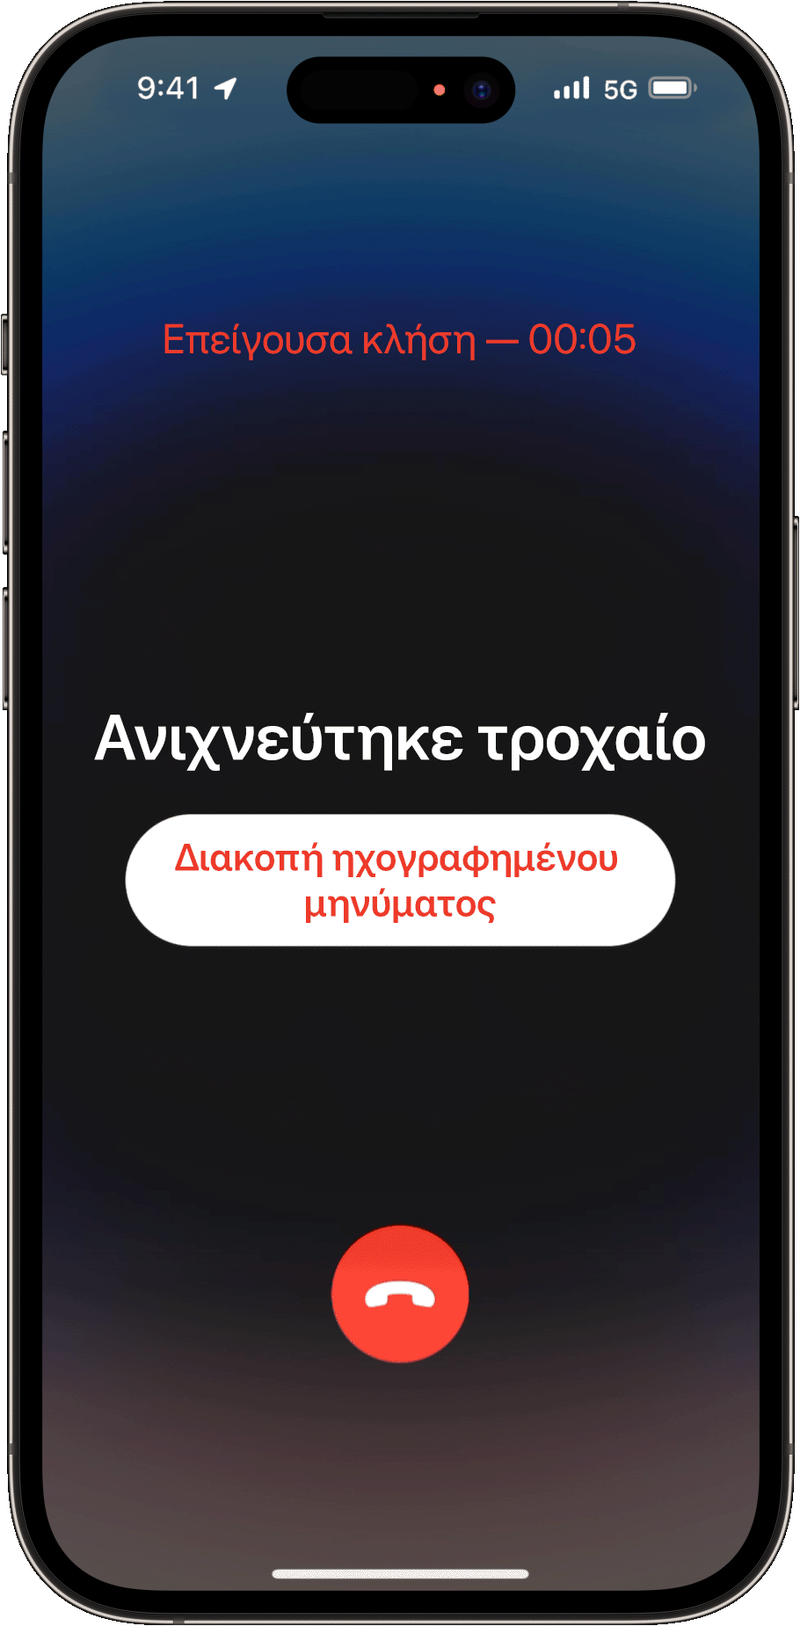 ios-16-iphone-14-pro-crash-detection-stop-recorded-message